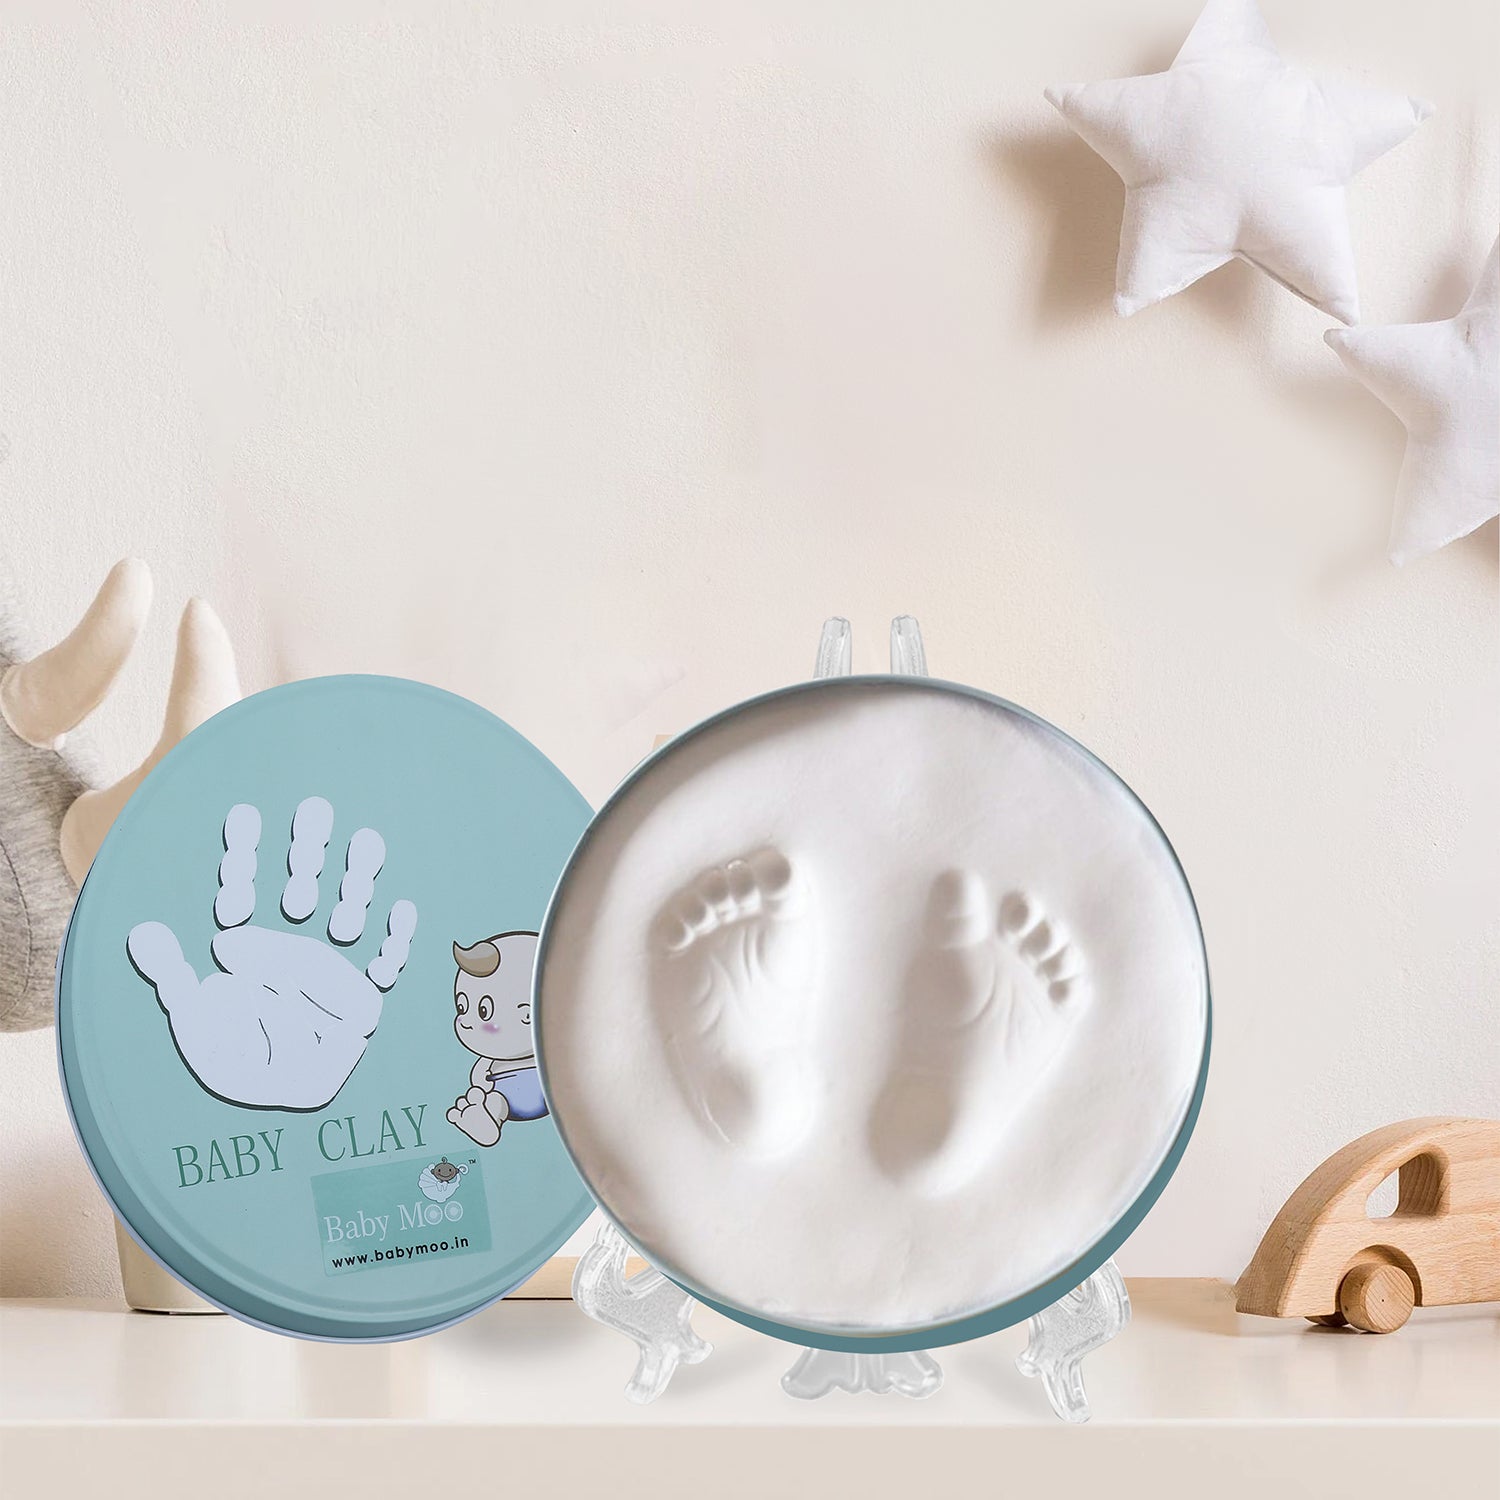 Baby Moo Handprint And Footprint Impression Keepsake DIY Kit With Plate And Stand - White - Baby Moo